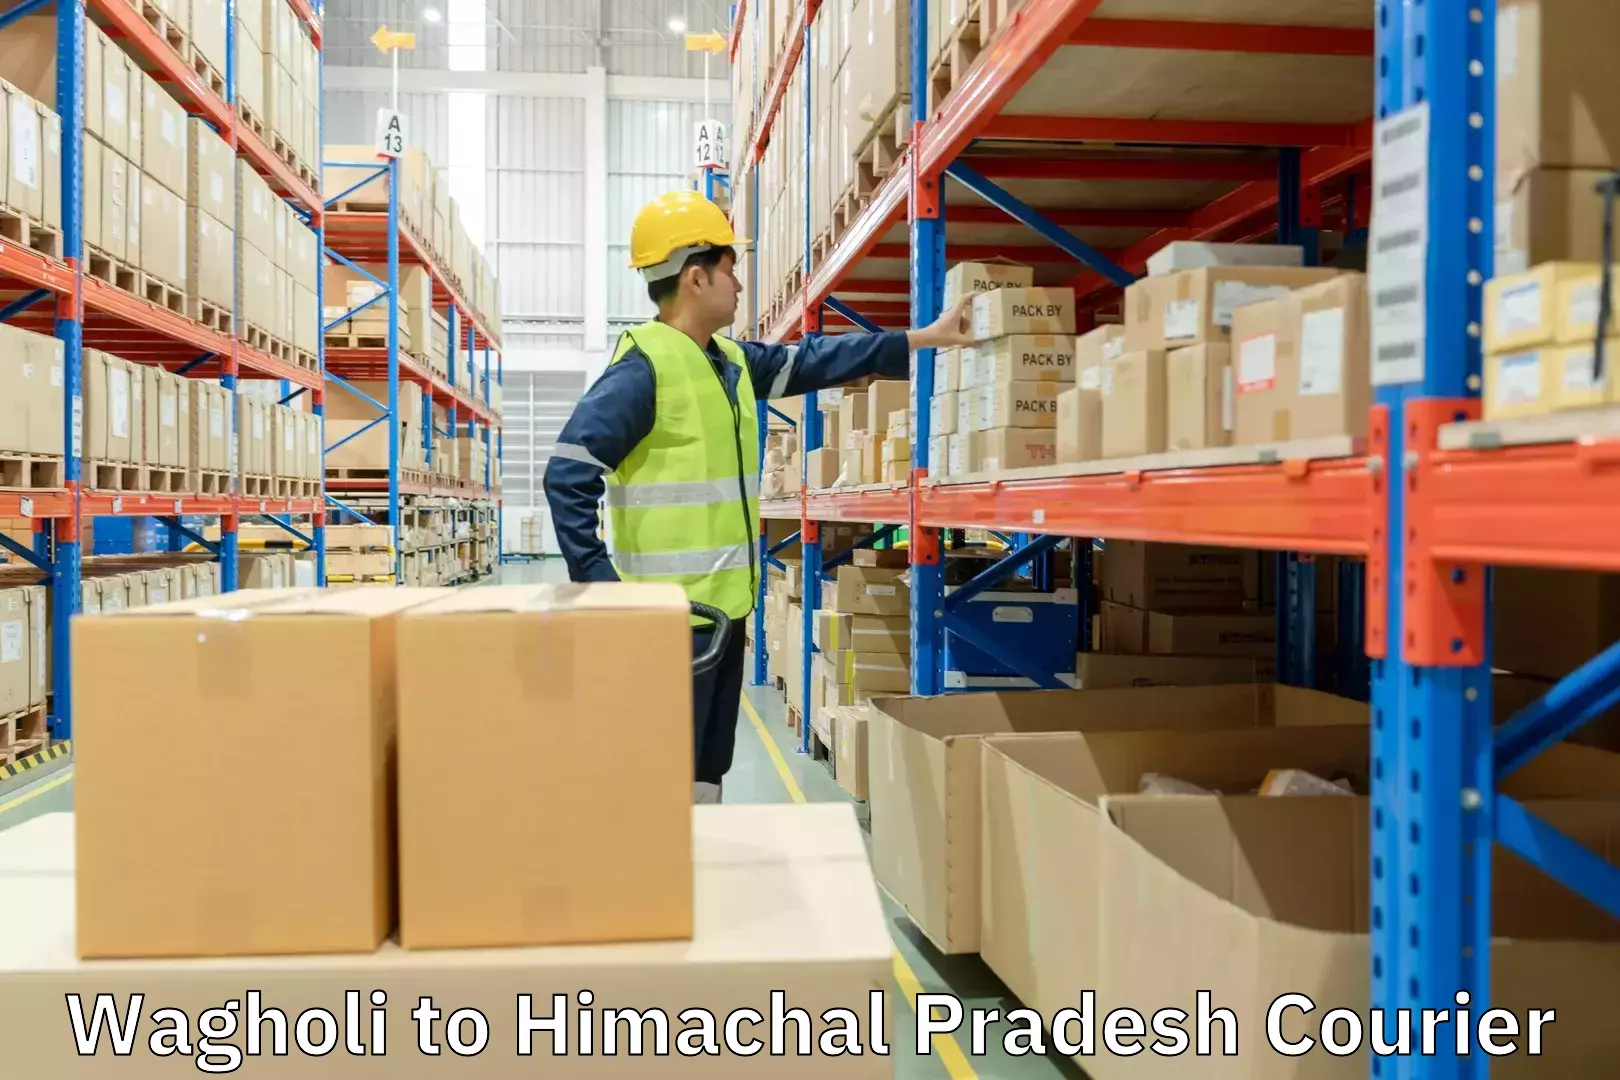 Sustainable shipping practices Wagholi to Himachal Pradesh